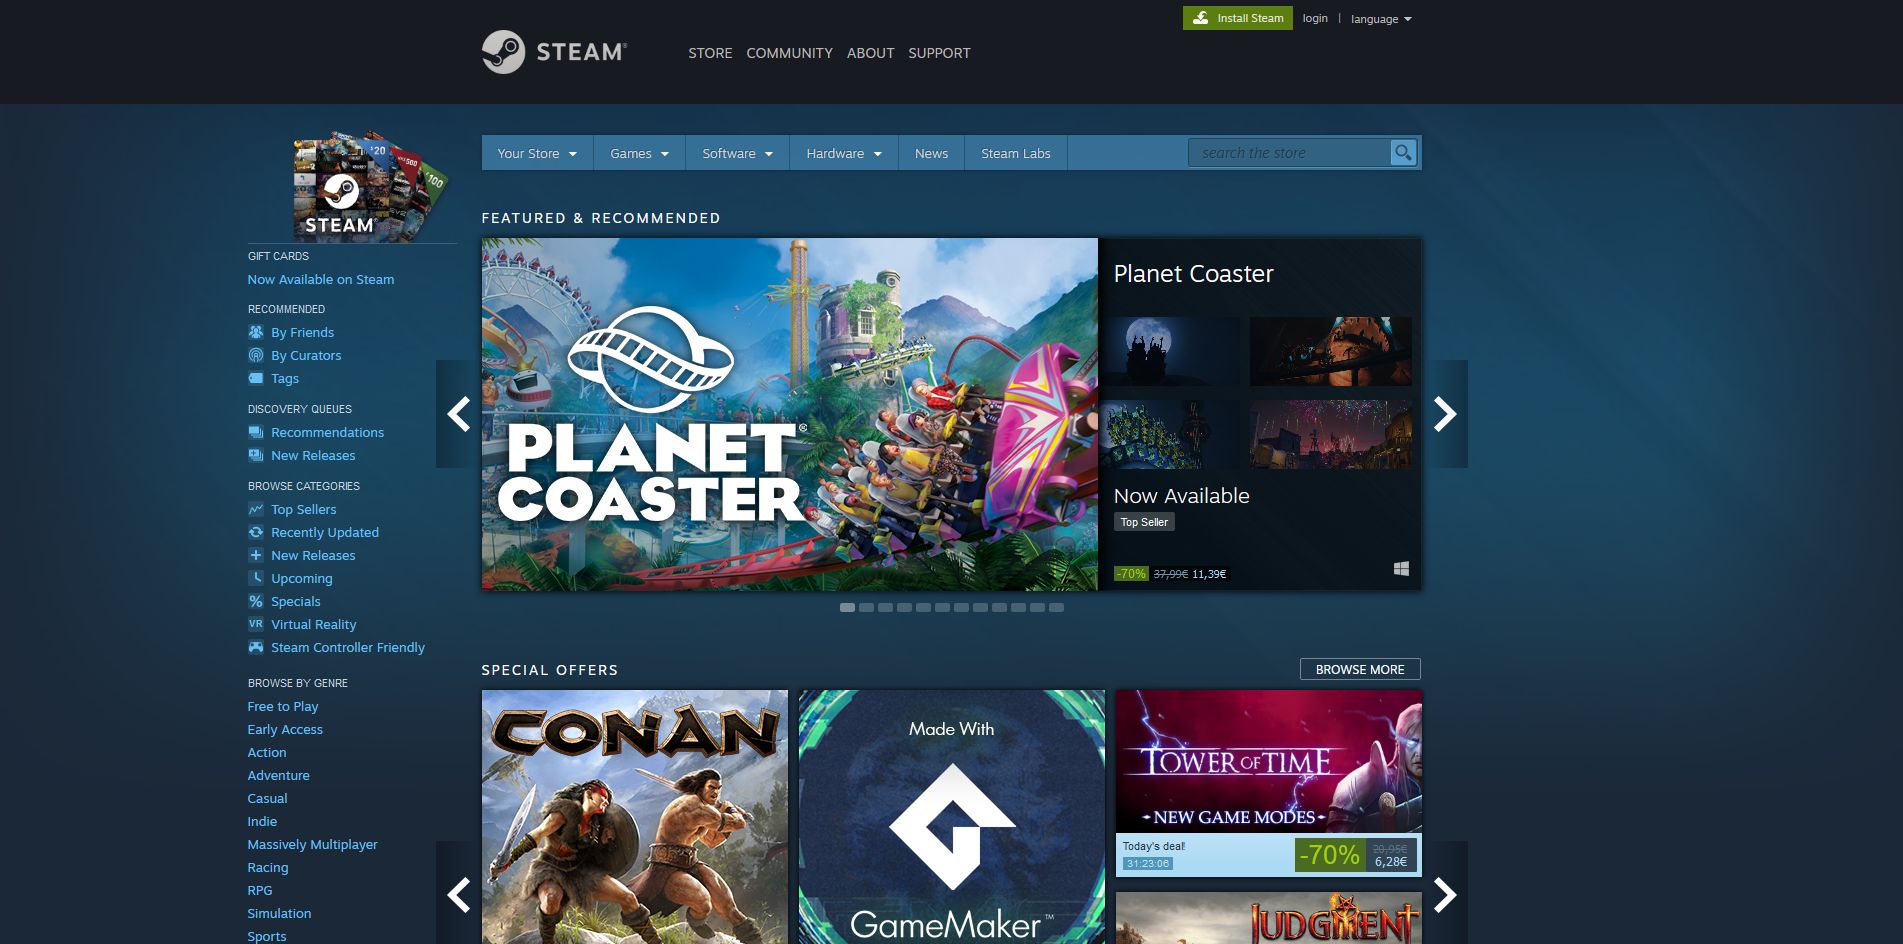 Steam for Mac is now available and you can download Portal for FREE